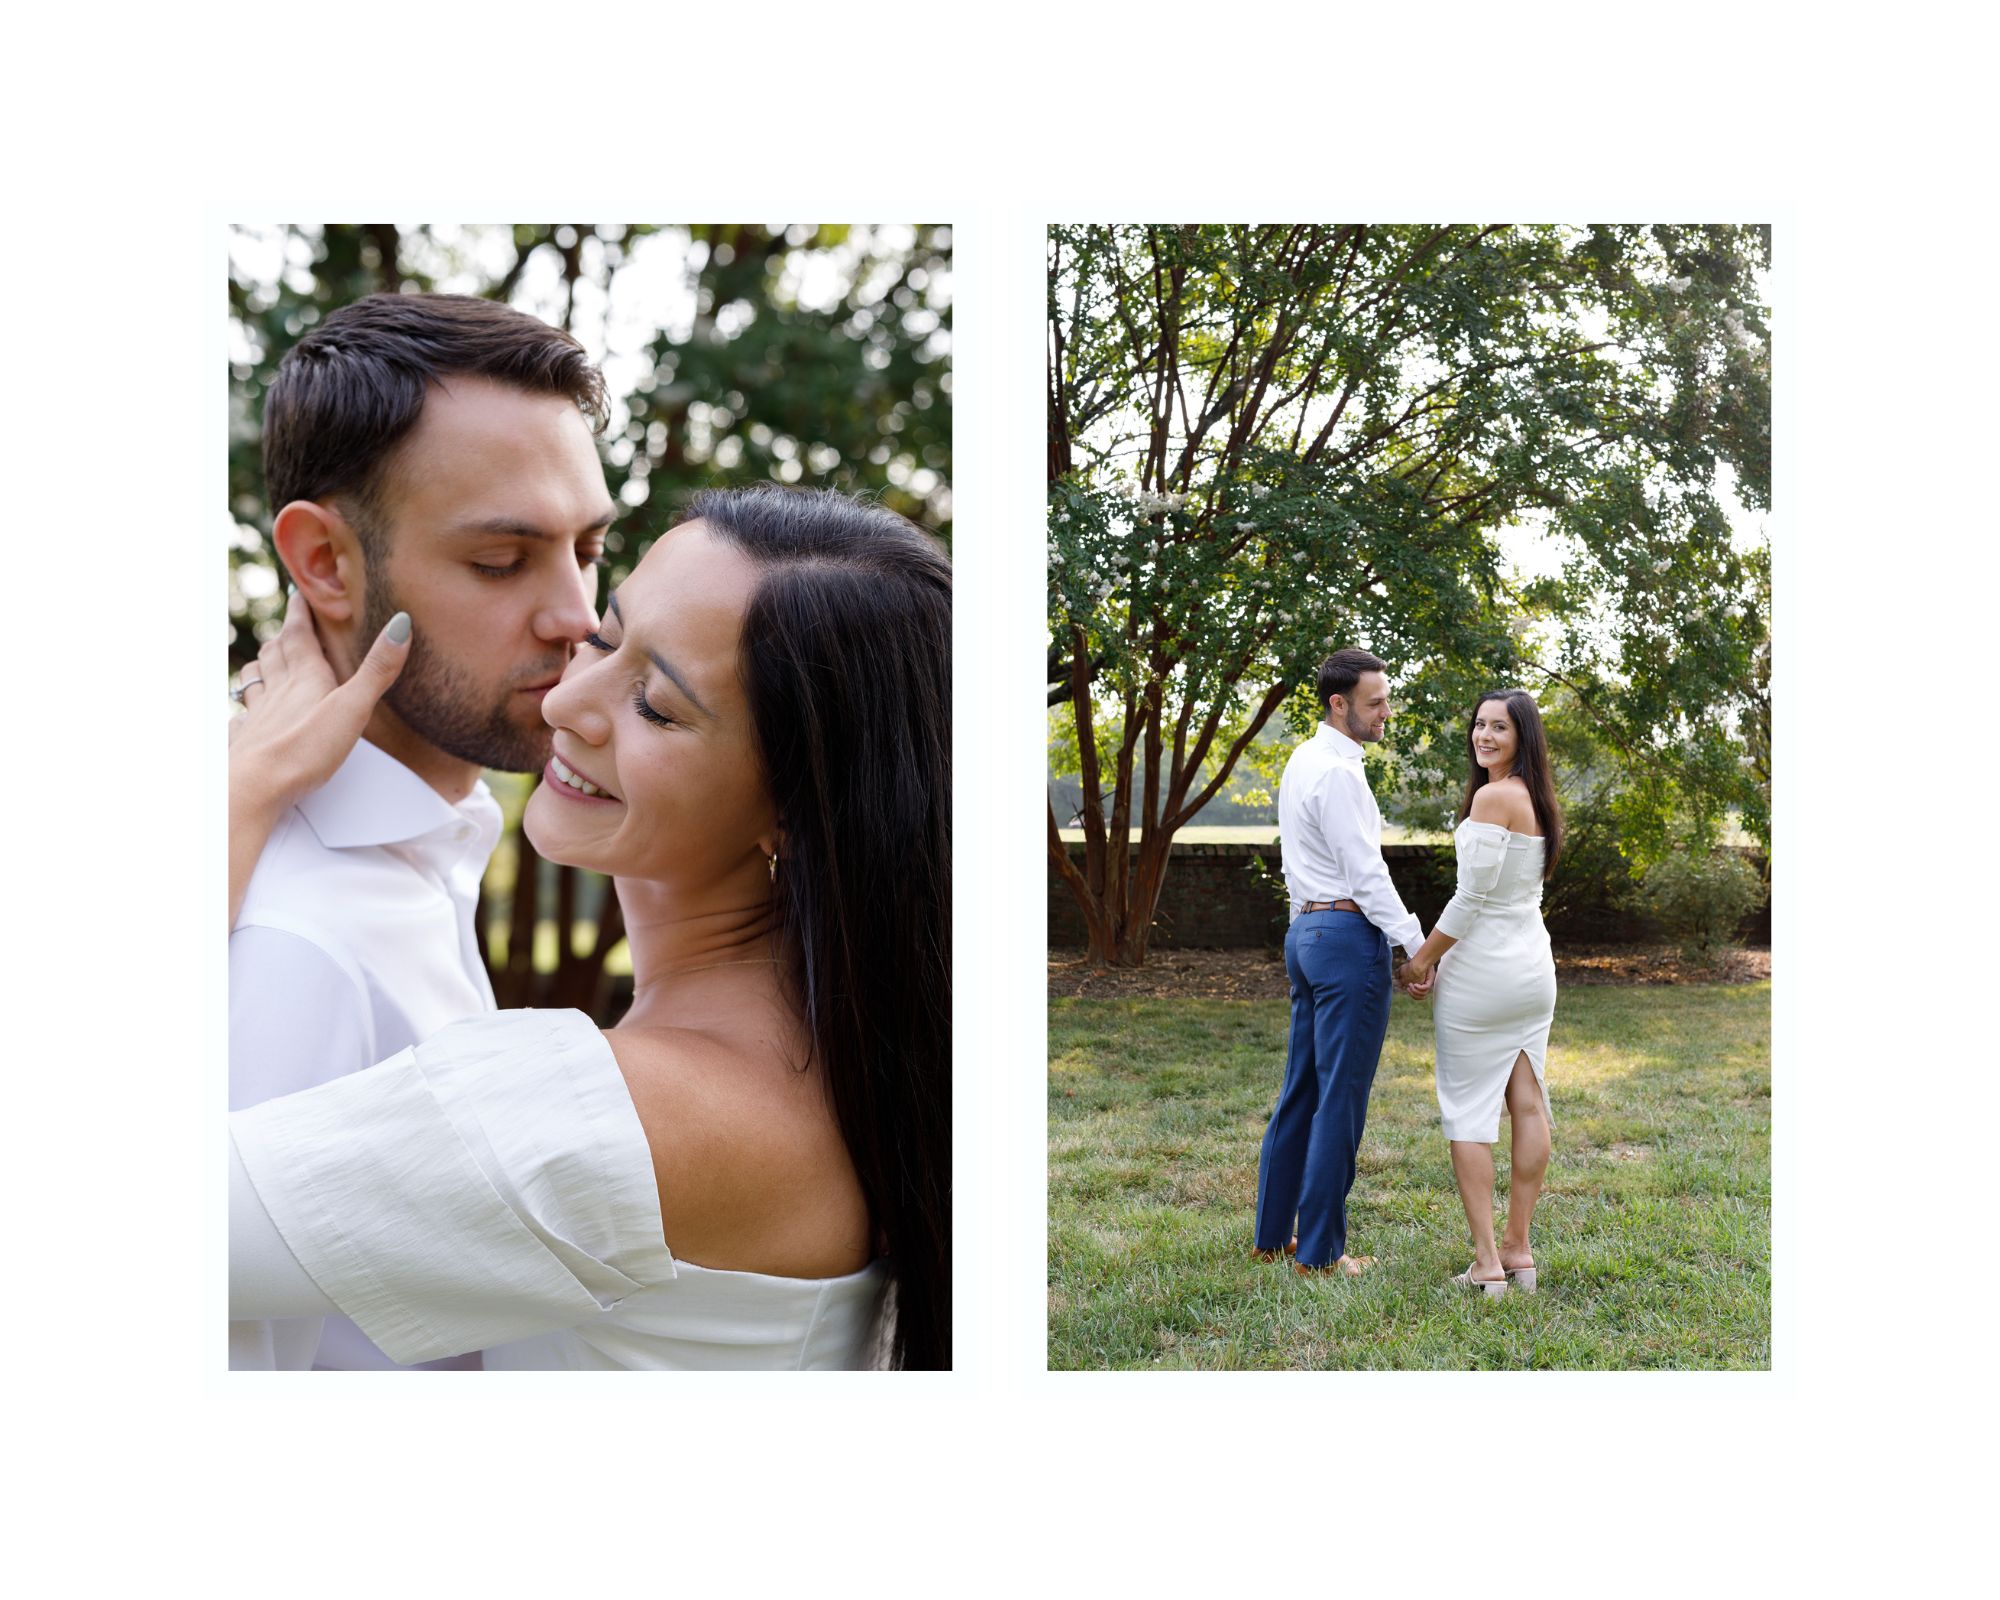 Photos featuring a Northern Virginia couple for their engagement session at Morven Park.